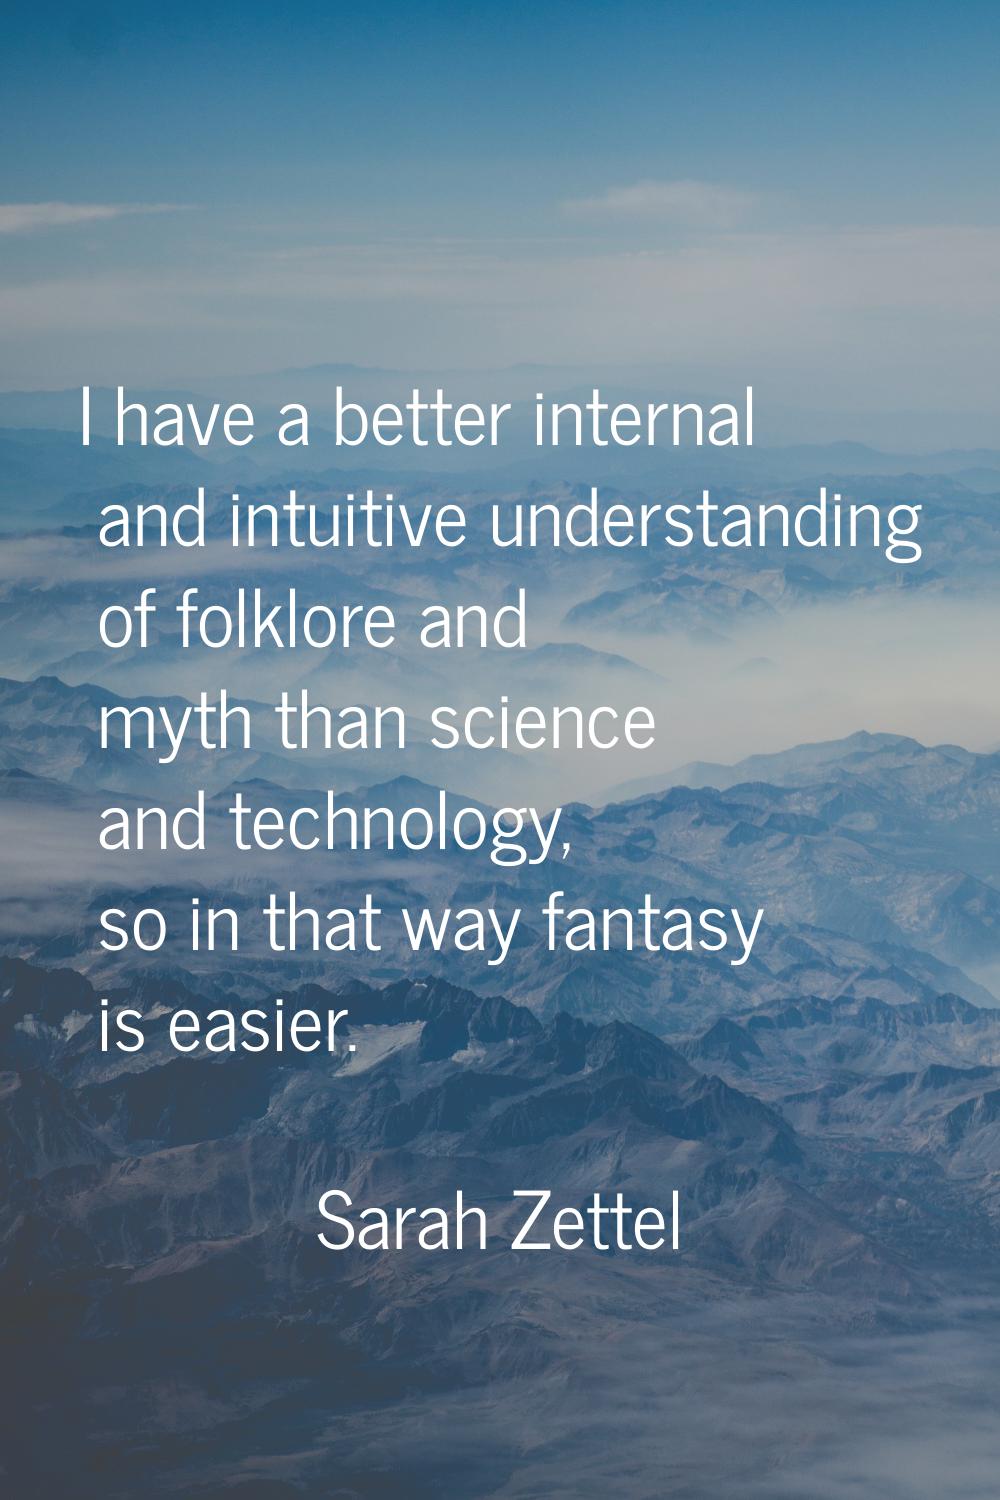 I have a better internal and intuitive understanding of folklore and myth than science and technolo